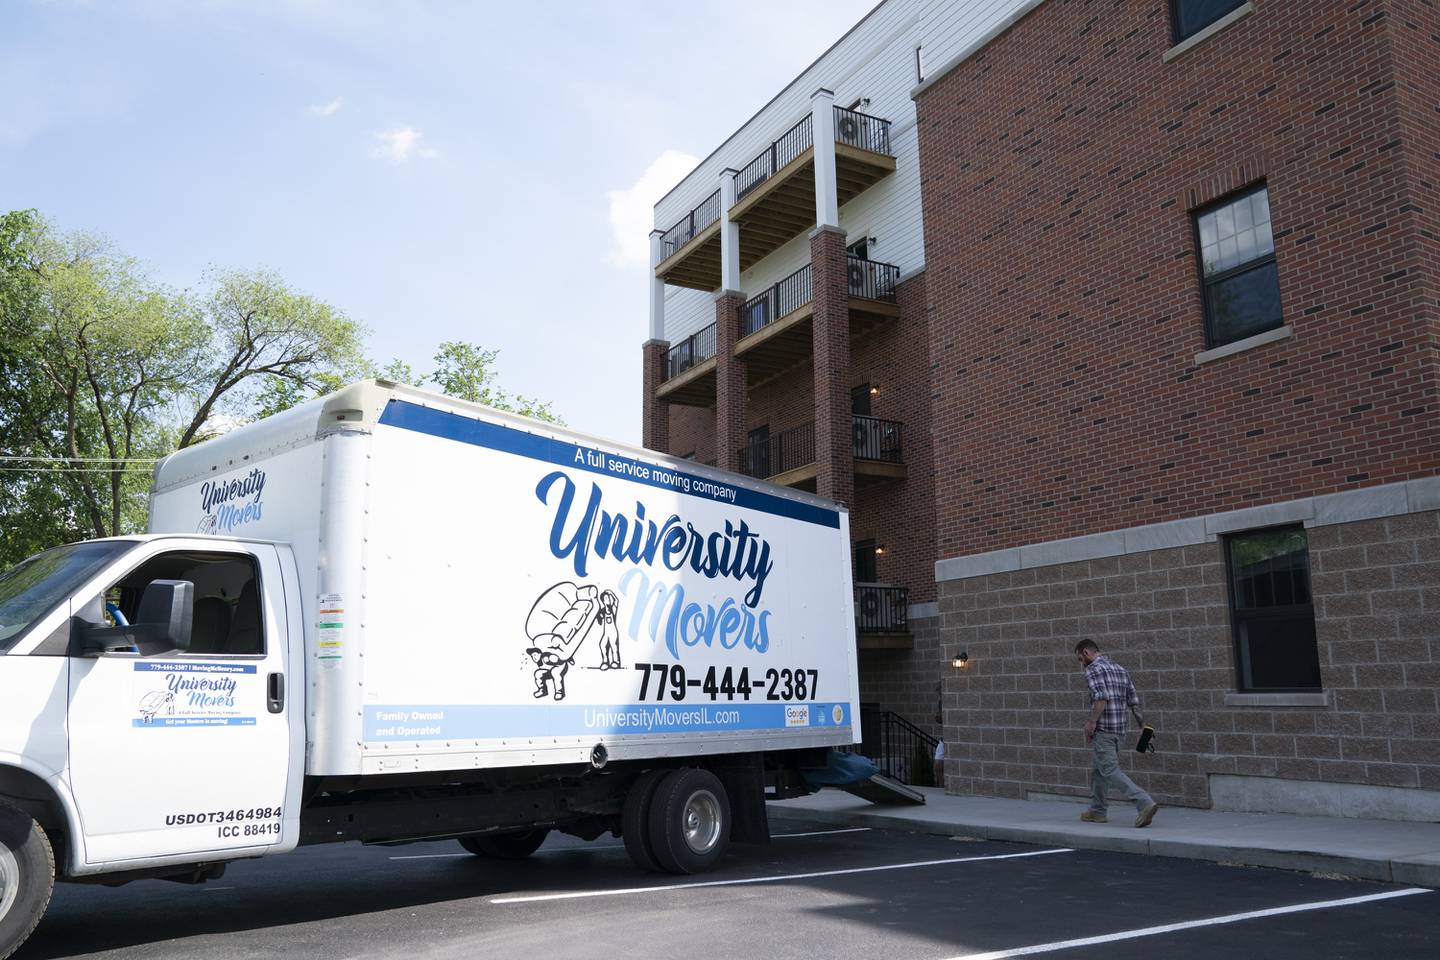 Residents move into the newly built Woodstock Square Apartments on Madison and Church streets in Woodstock. Tenants began to move in this week to the 30-unit, five-story rental apartment complex.